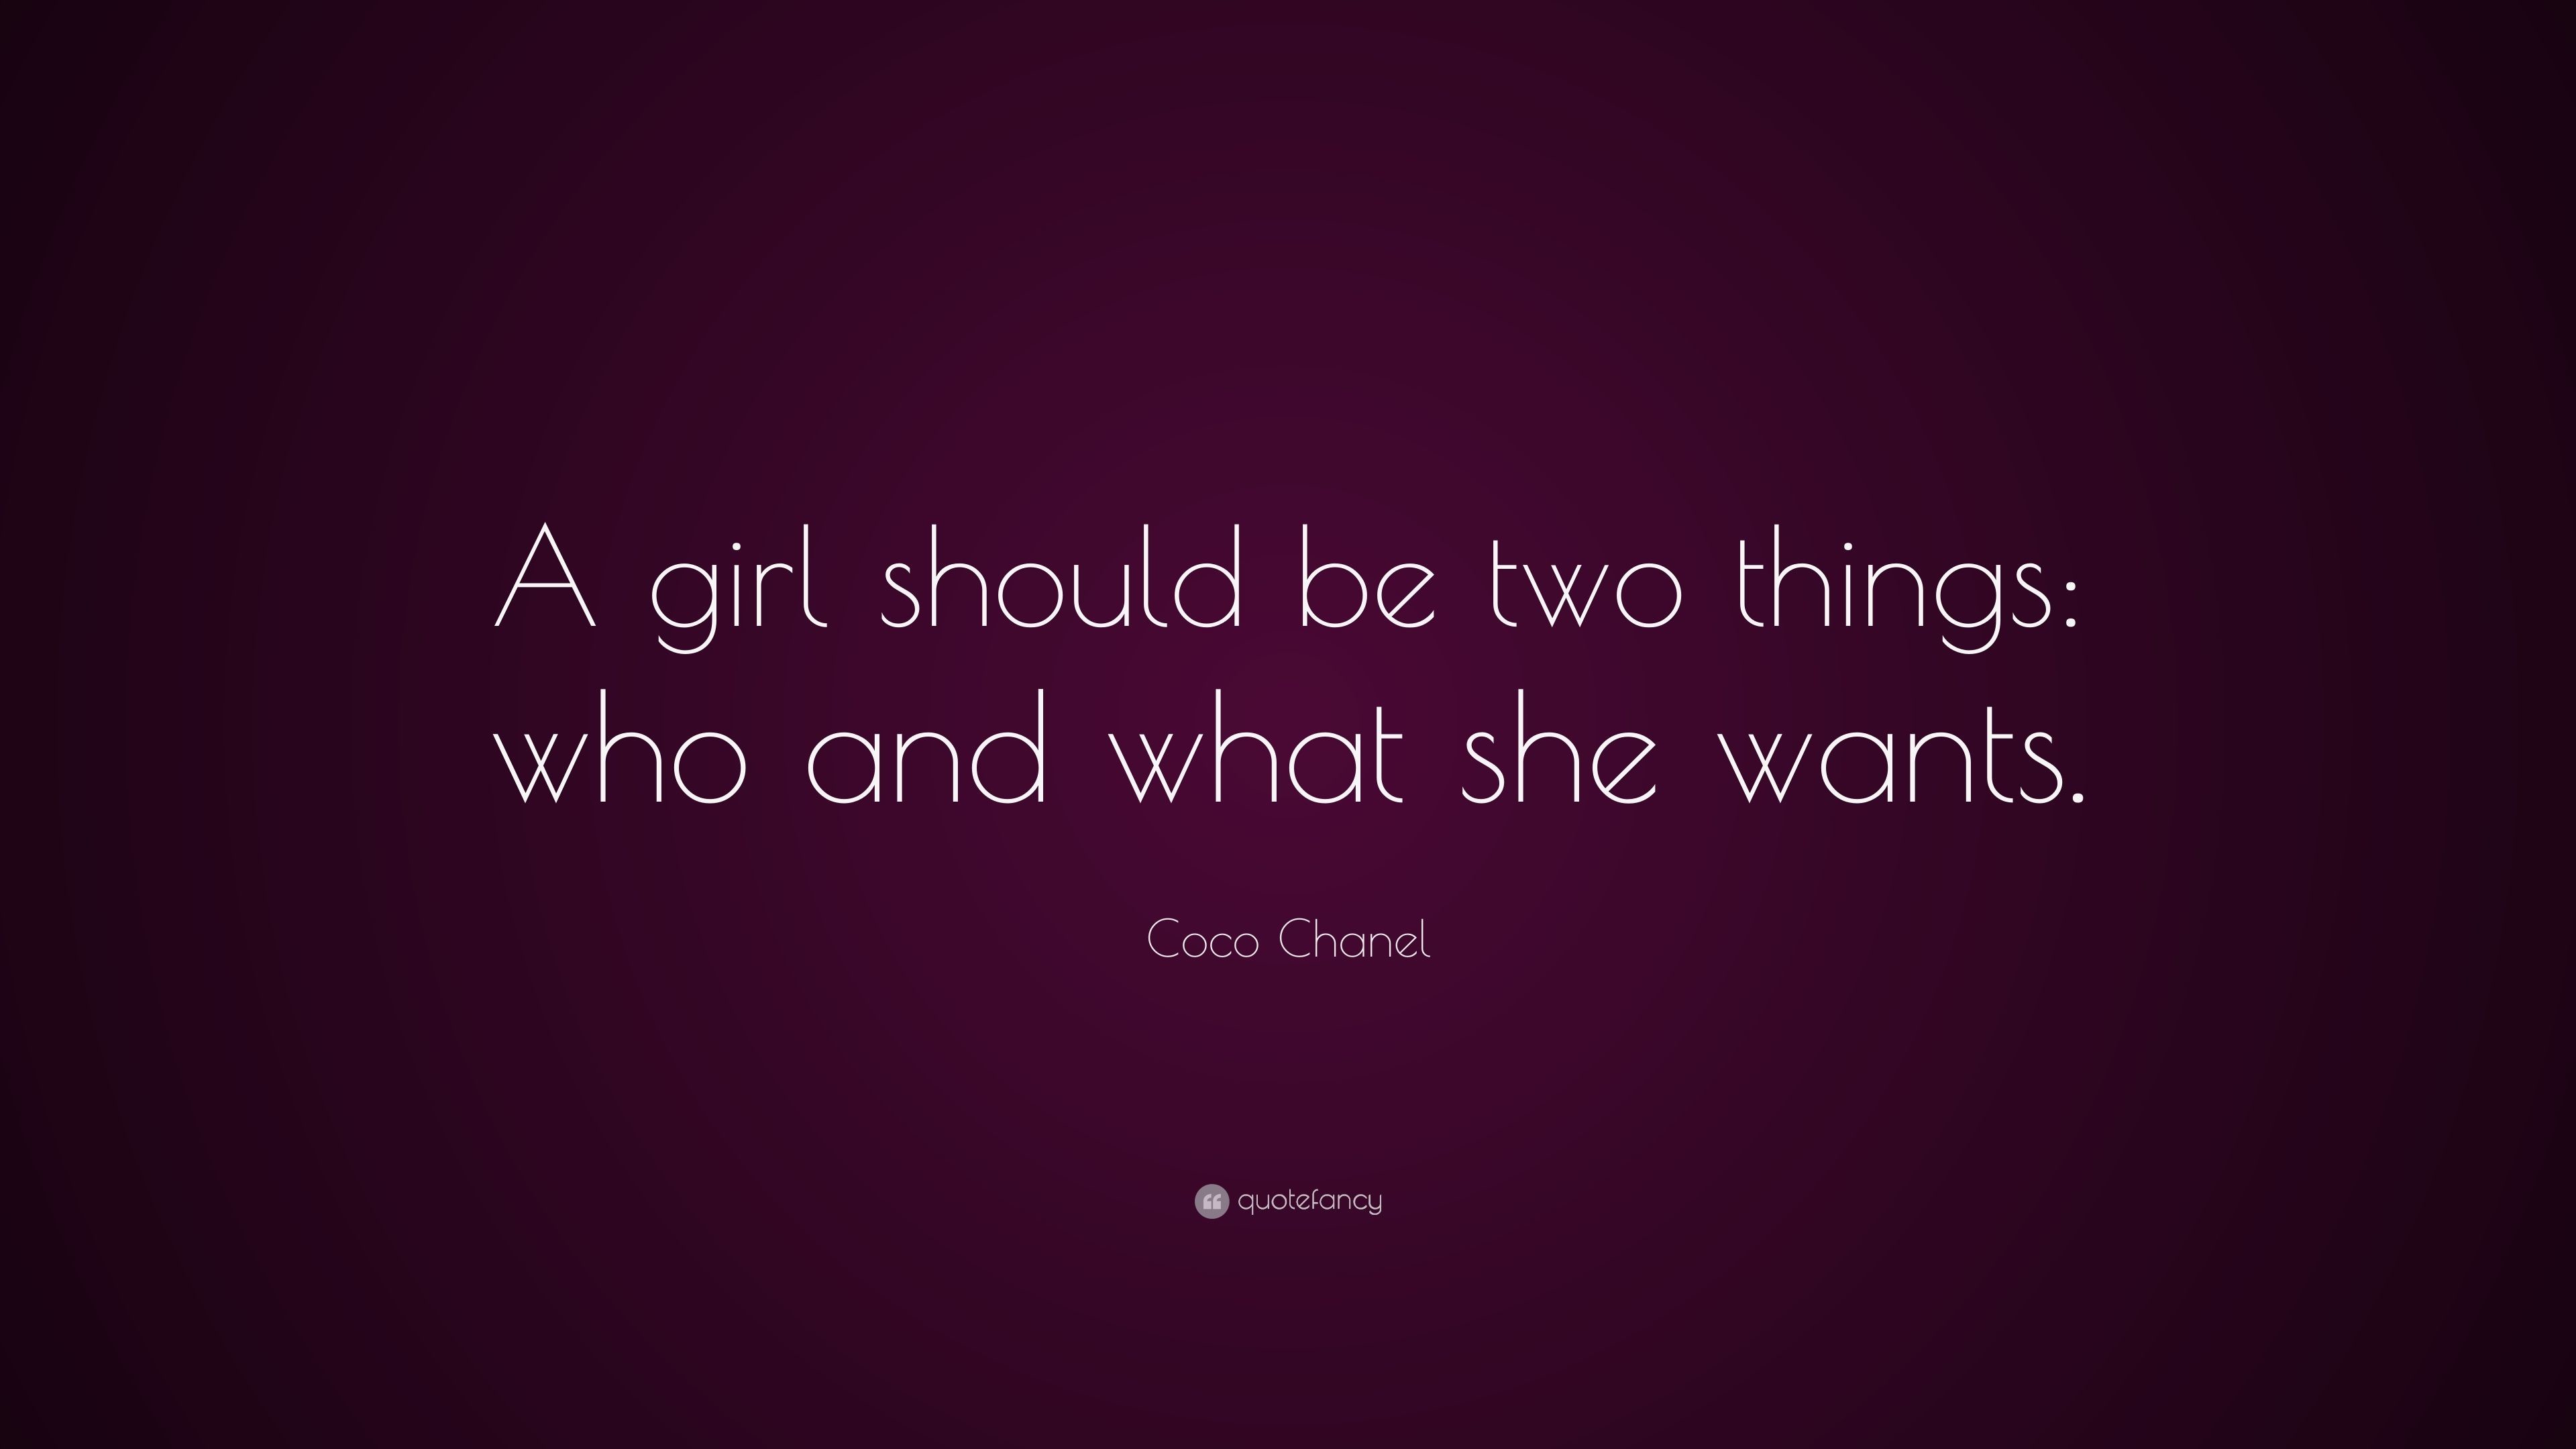 3840x2160 Coco Chanel Quotes (22 wallpapers) - Quotefancy